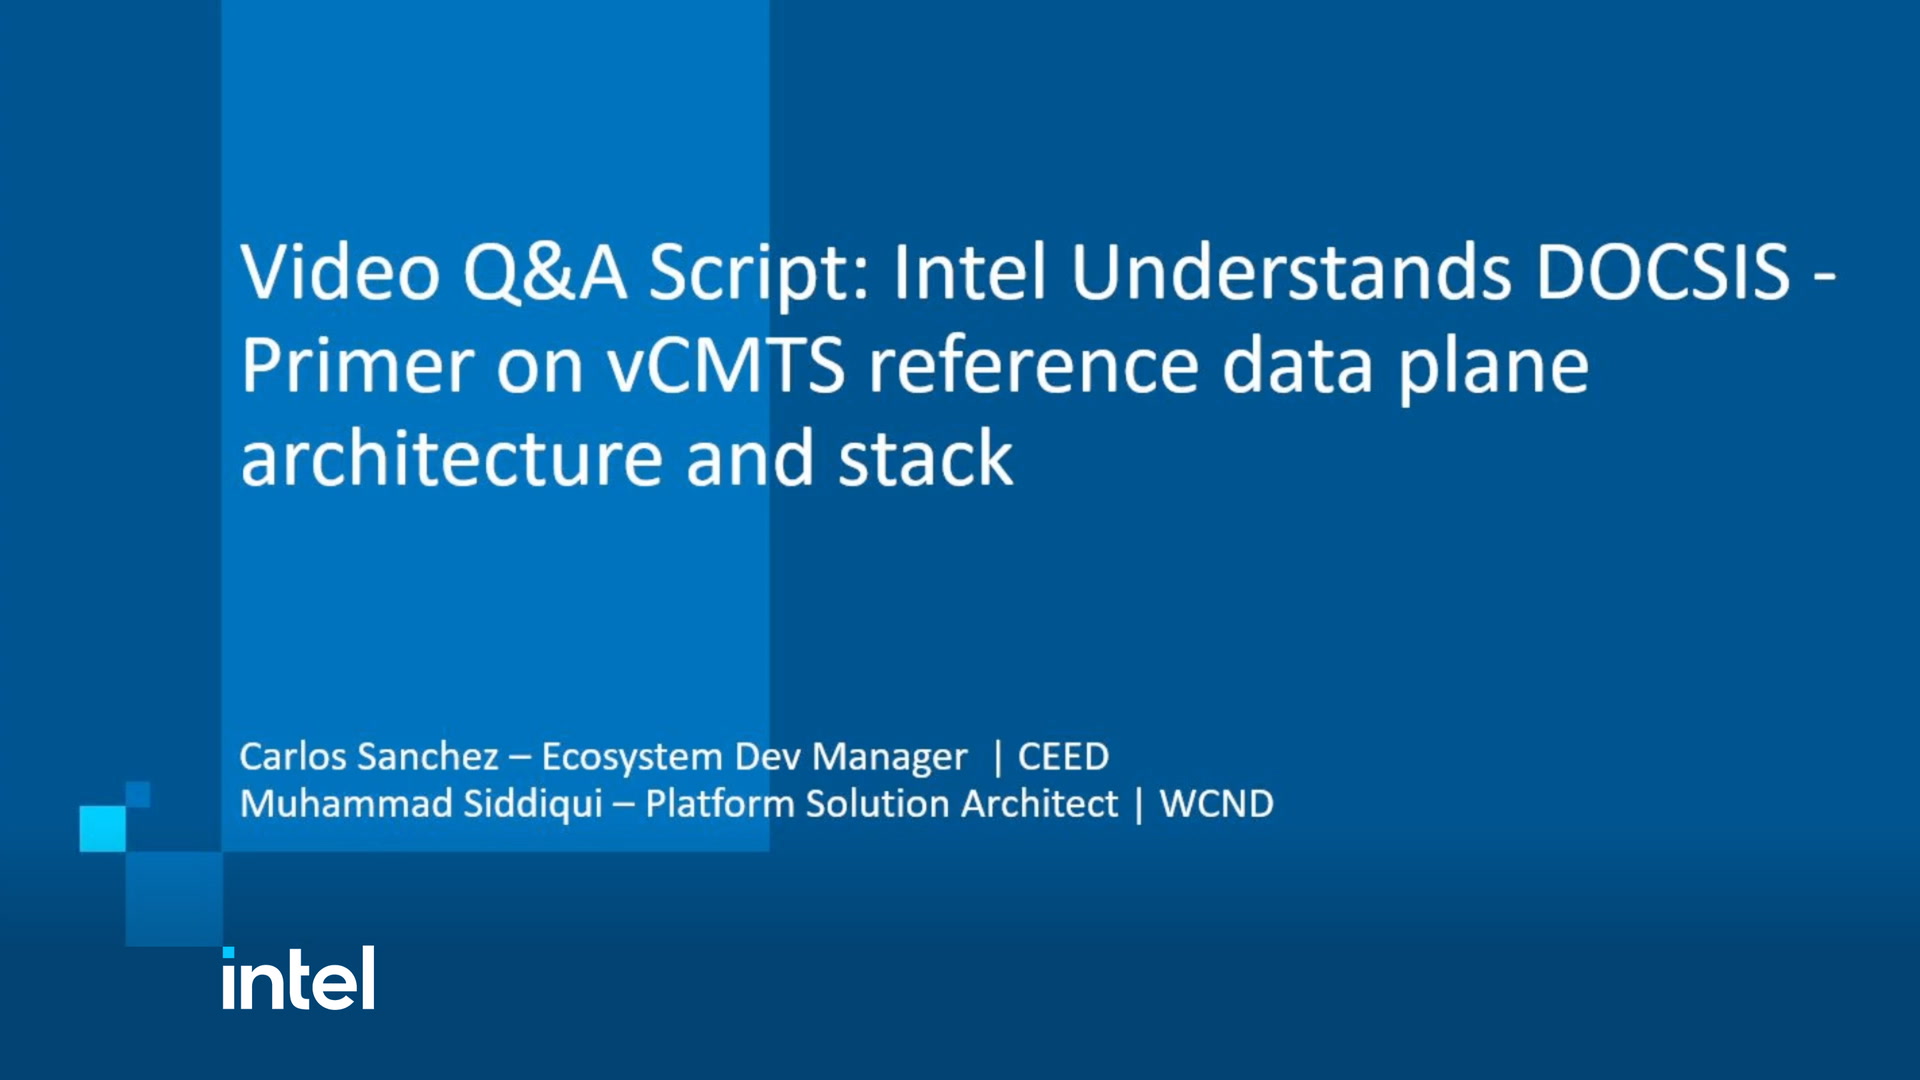 Chapter 1: Intel Knows DOCSIS : Primer on Intel’s vCMTS Reference Data Plane